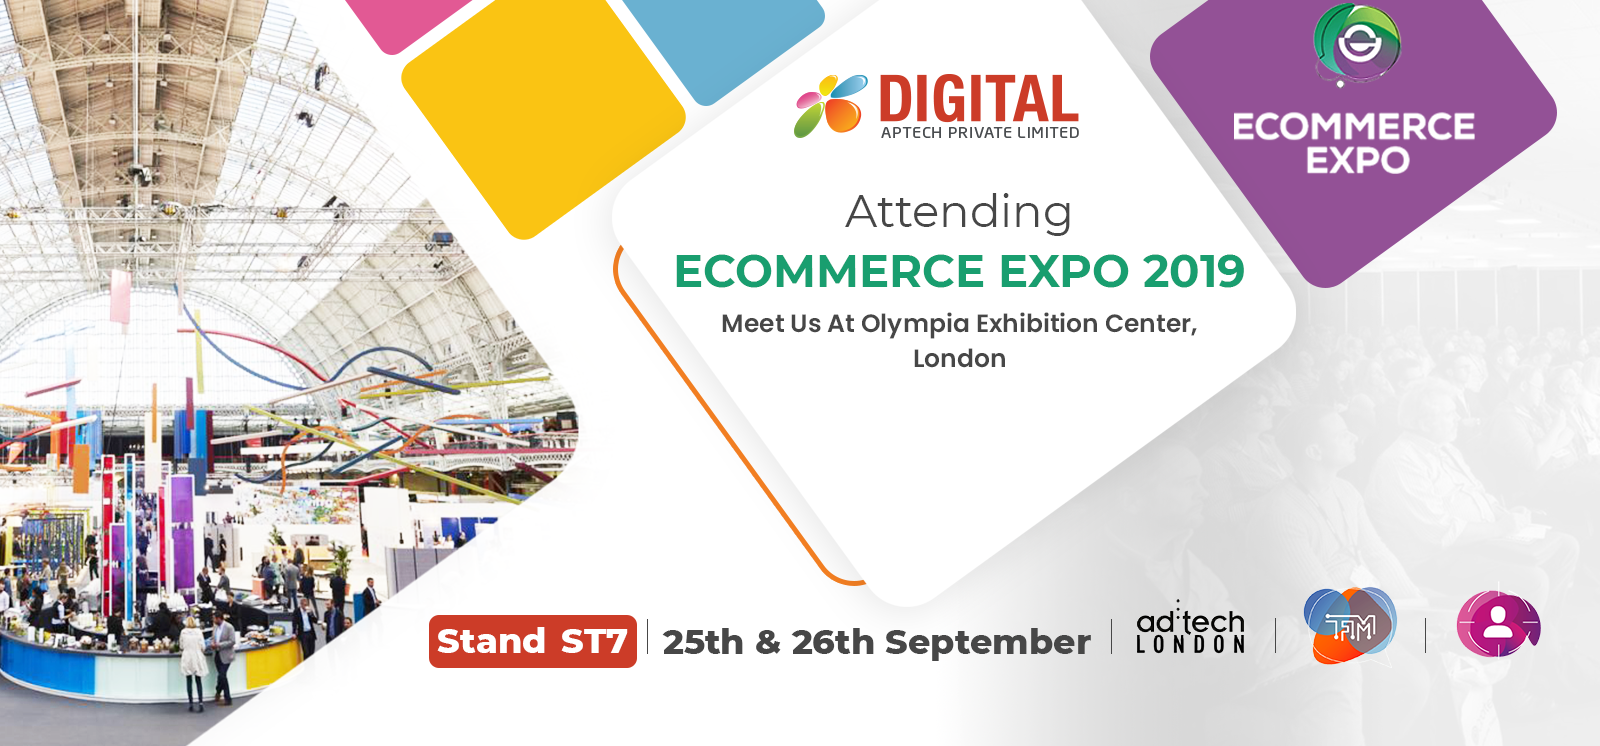 Digital Aptech to Attend Ecommerce Expo 2019 in London